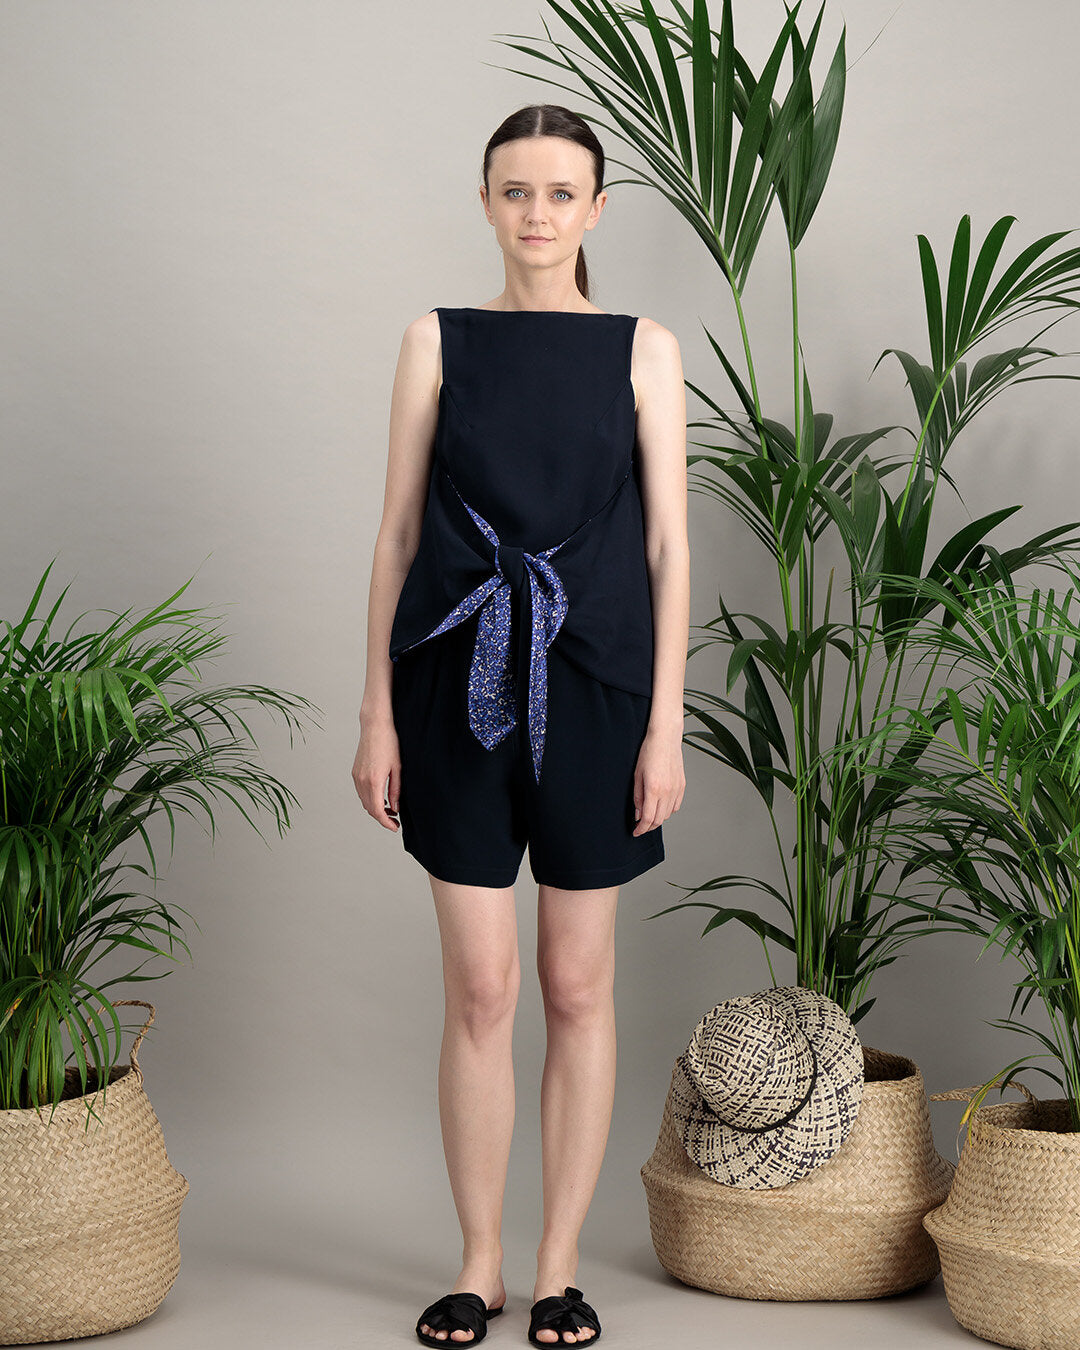 CARAPACE top in blue silk crepe and cotton